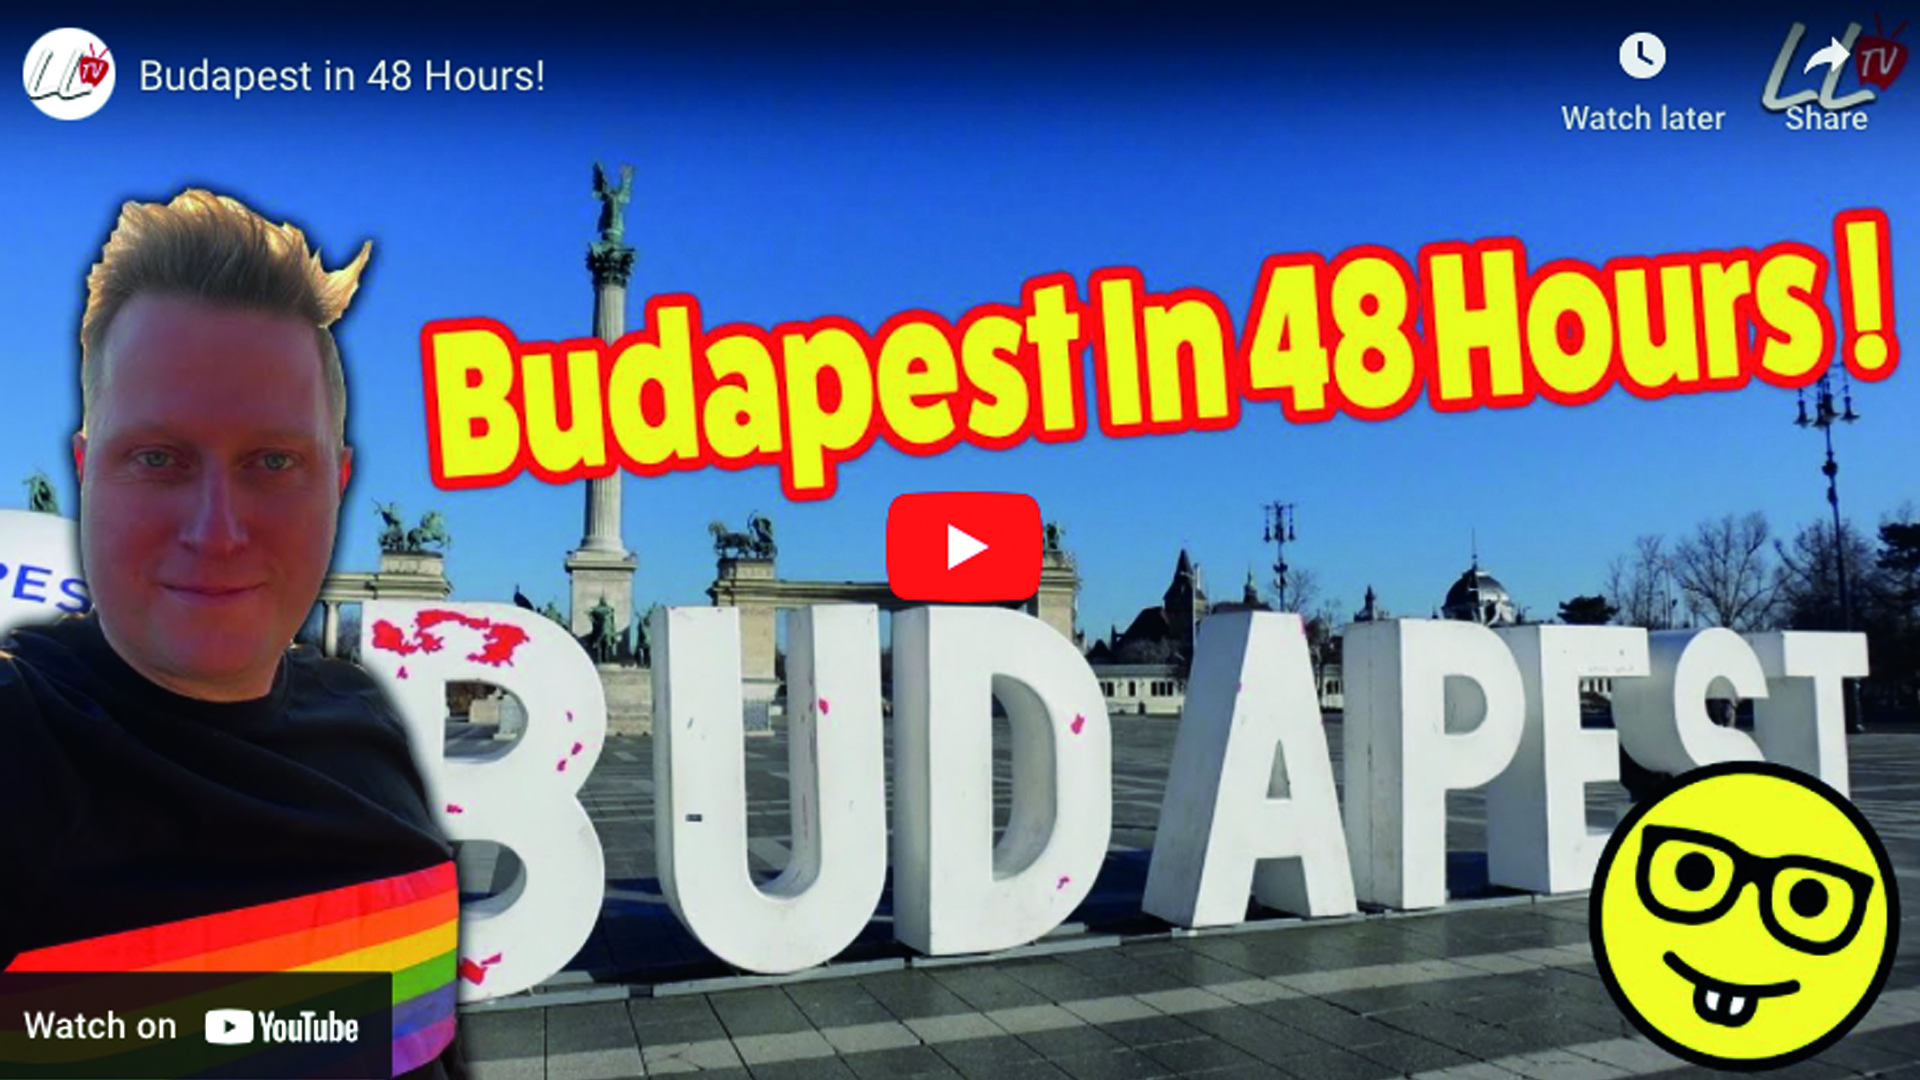 Budapest in 48 Hours!